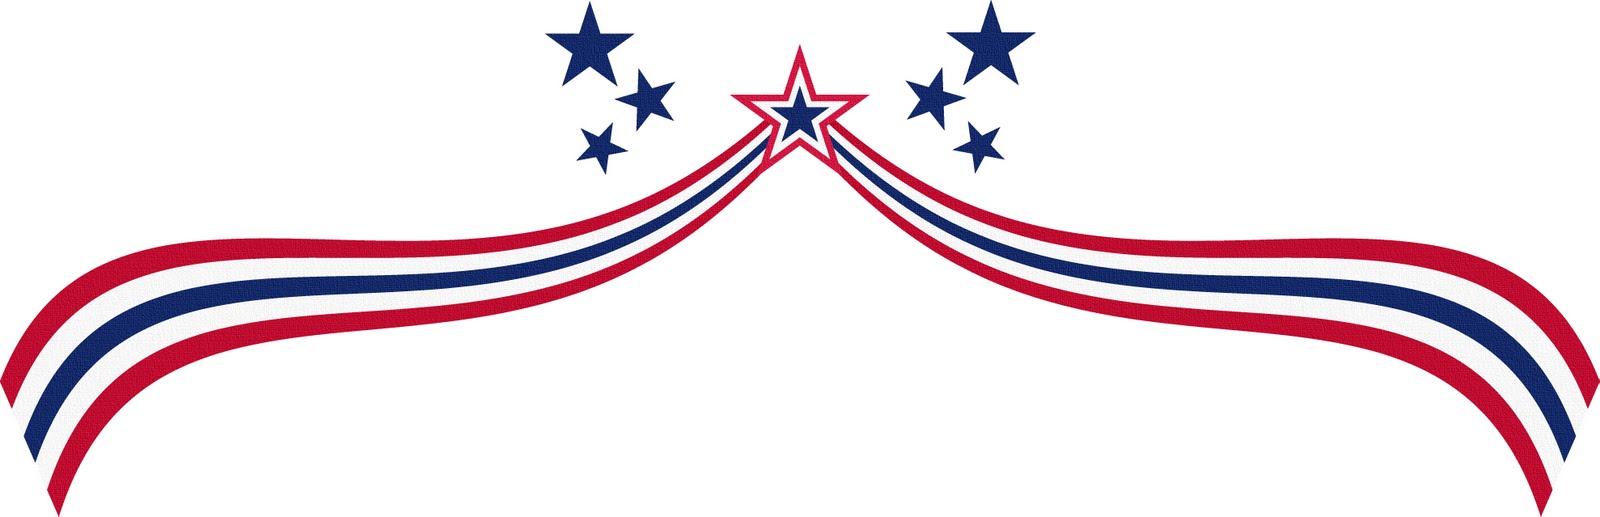 free clipart 4th of july borders - photo #6